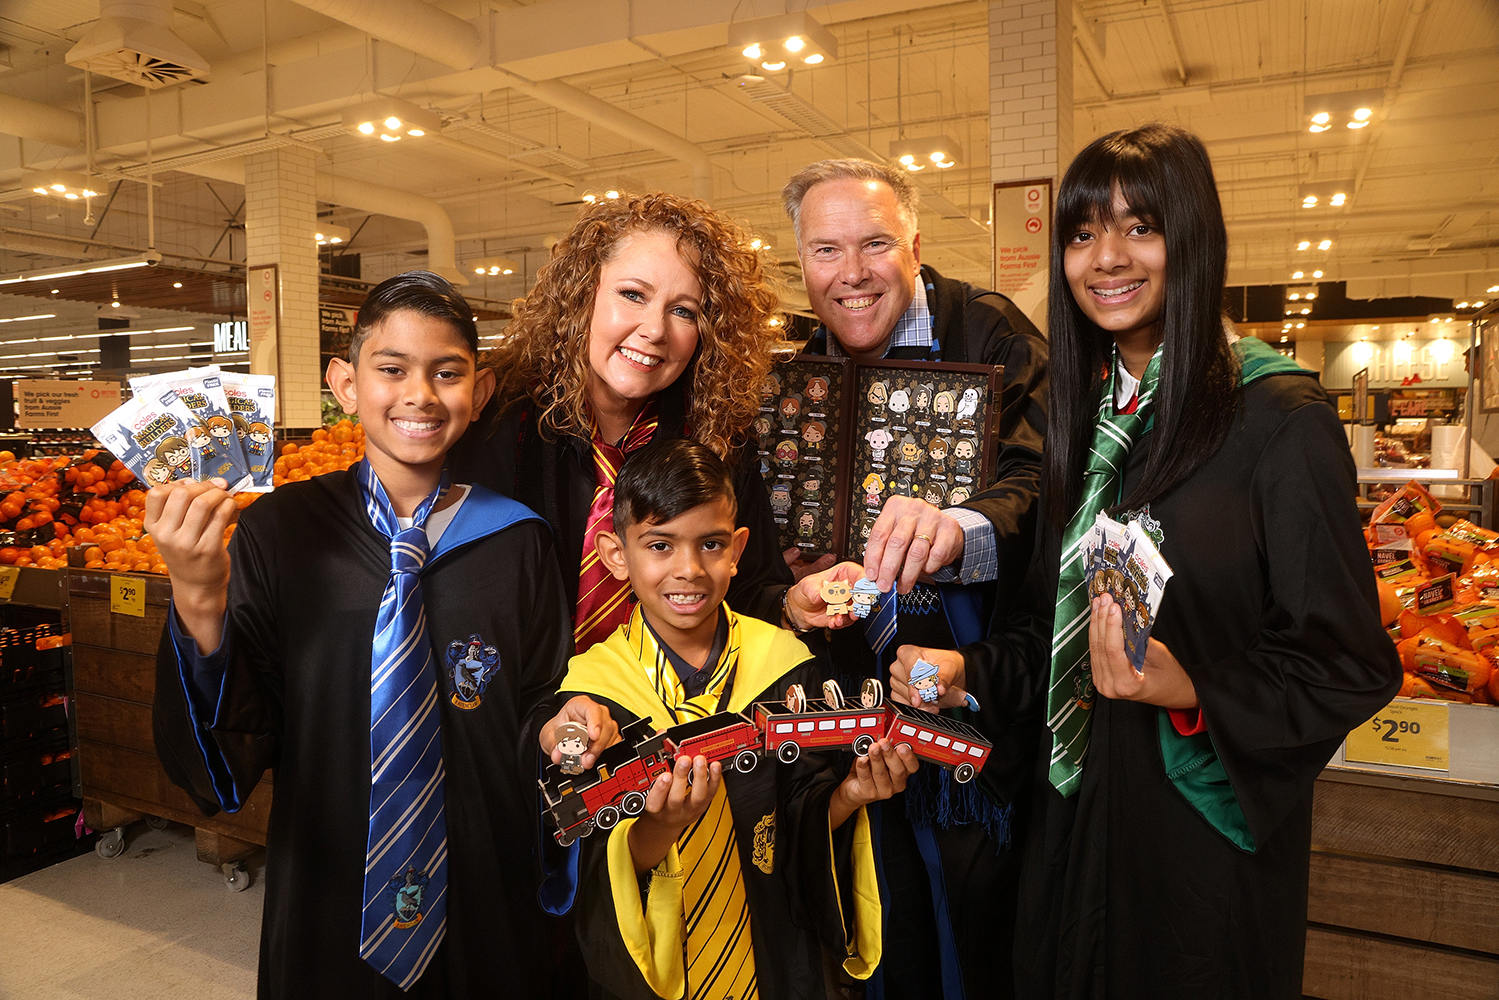 Coles CMO Lisa Ronson, Warner Bros. Consumer Products Vice President Andrew Bromell and Quade, Kynan and Escada with Coles’ new collectables, Coles Magical Builders